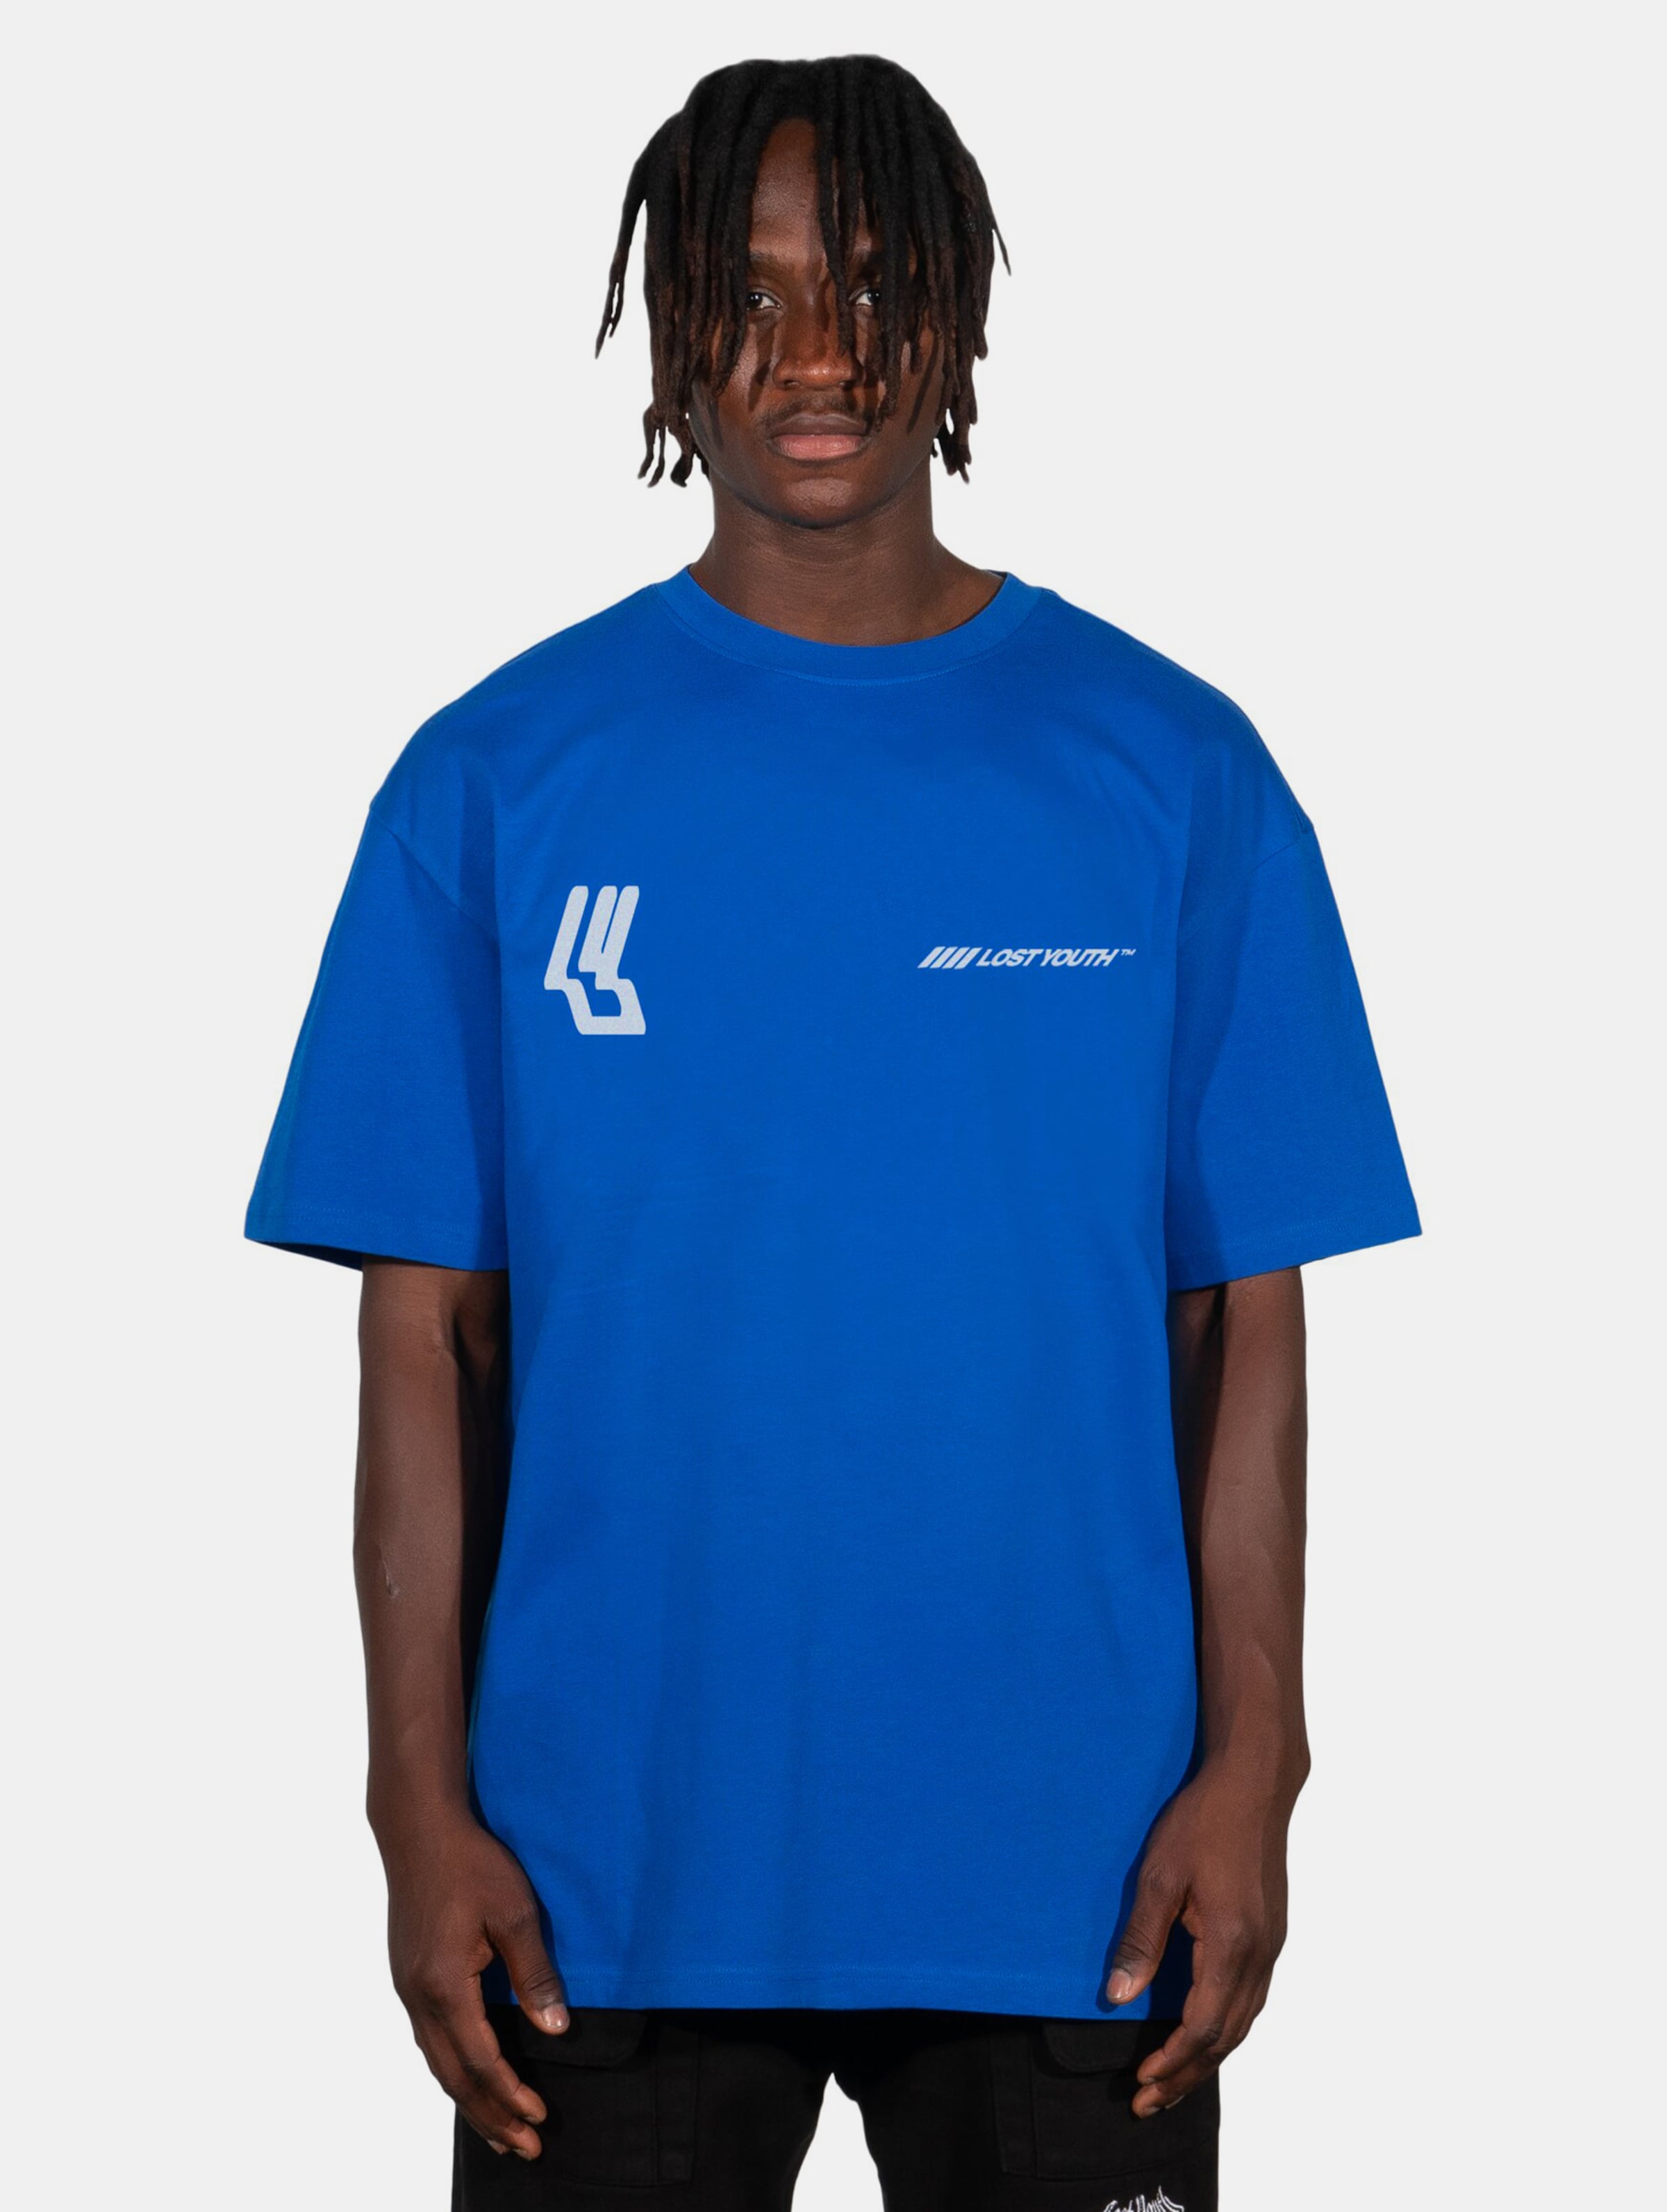 Lost Youth LY TEE- ICON V.2 Mannen op kleur blauw, Maat S